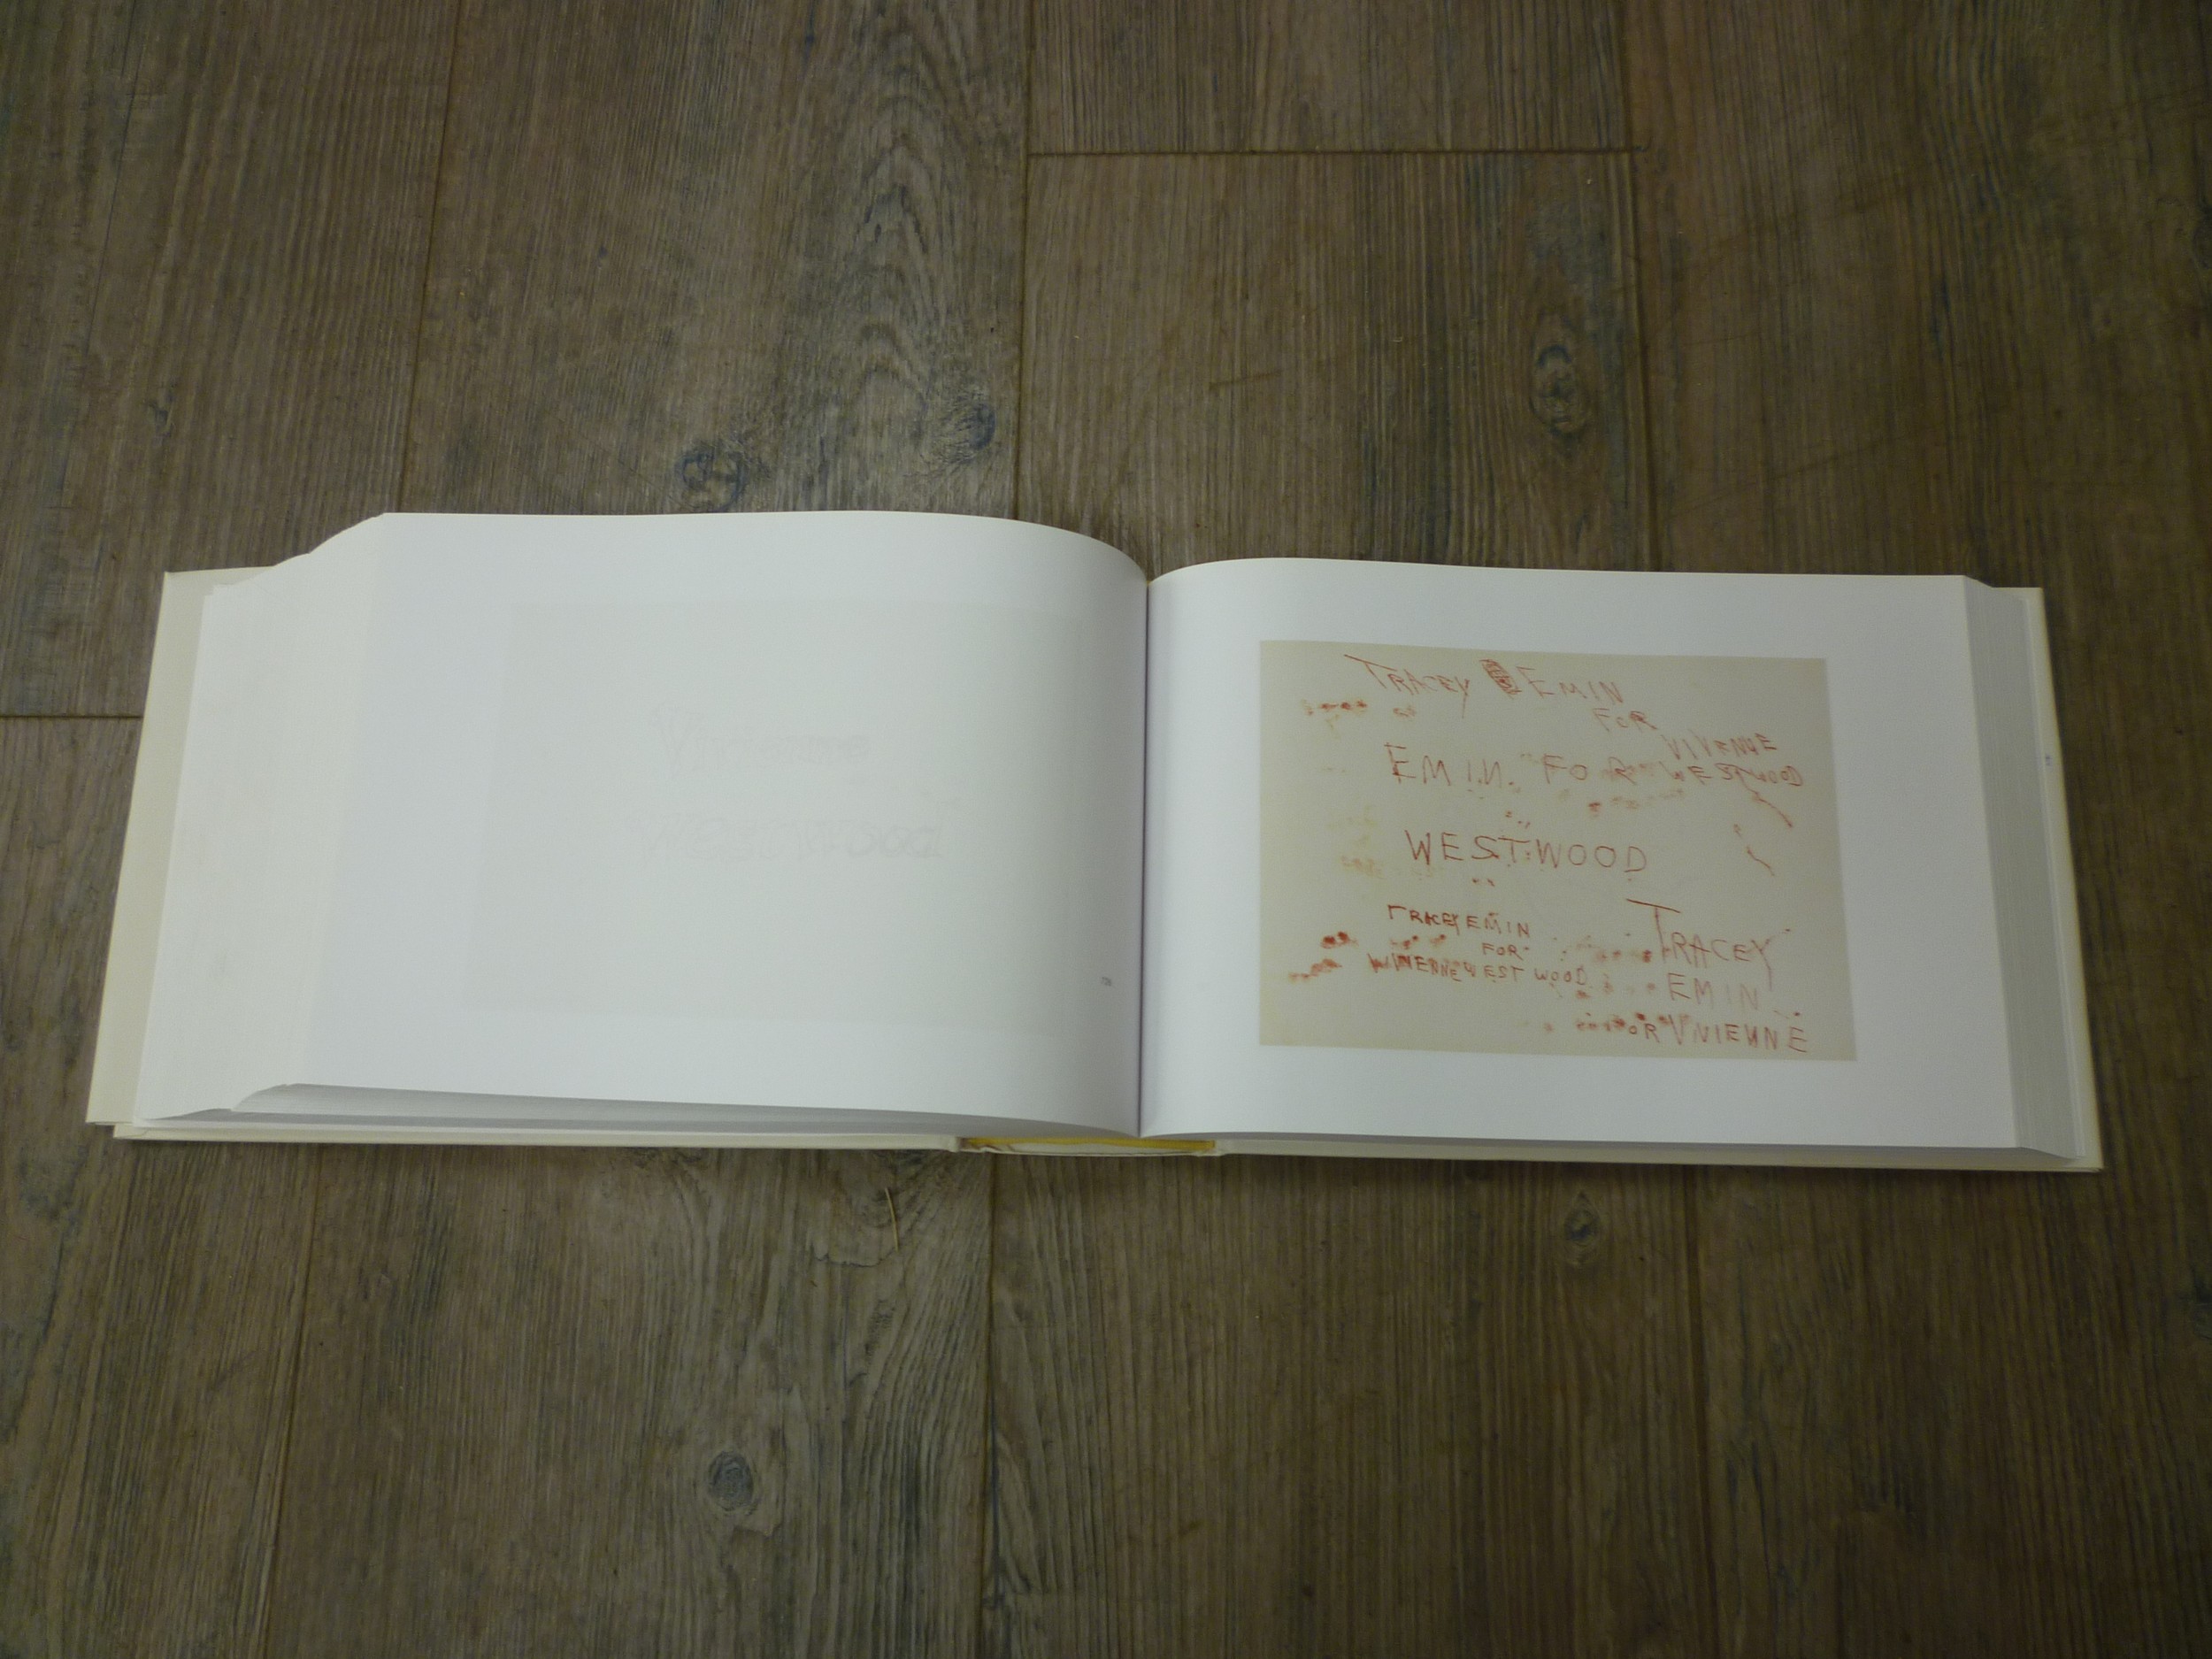 Tracey Emin 'One Thousand Drawings' - Rozzoli International publications, 1st edition - Image 3 of 3